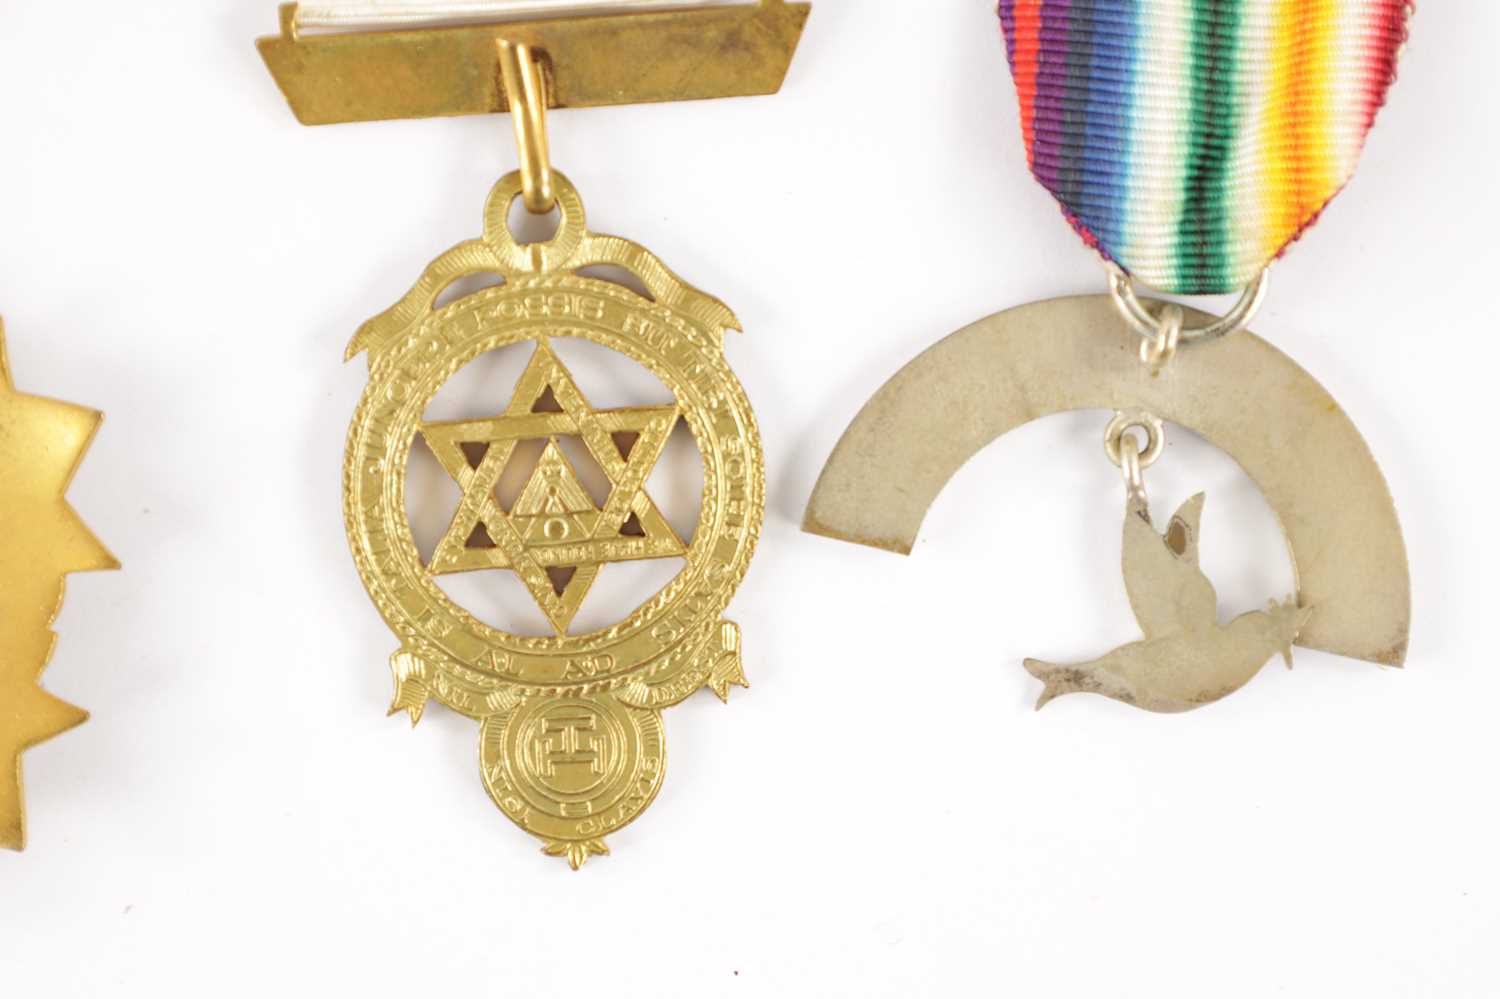 A COLLECTION OF MASONIC AND ORDER OF THE BUFFALOES MEDALS - Image 8 of 8